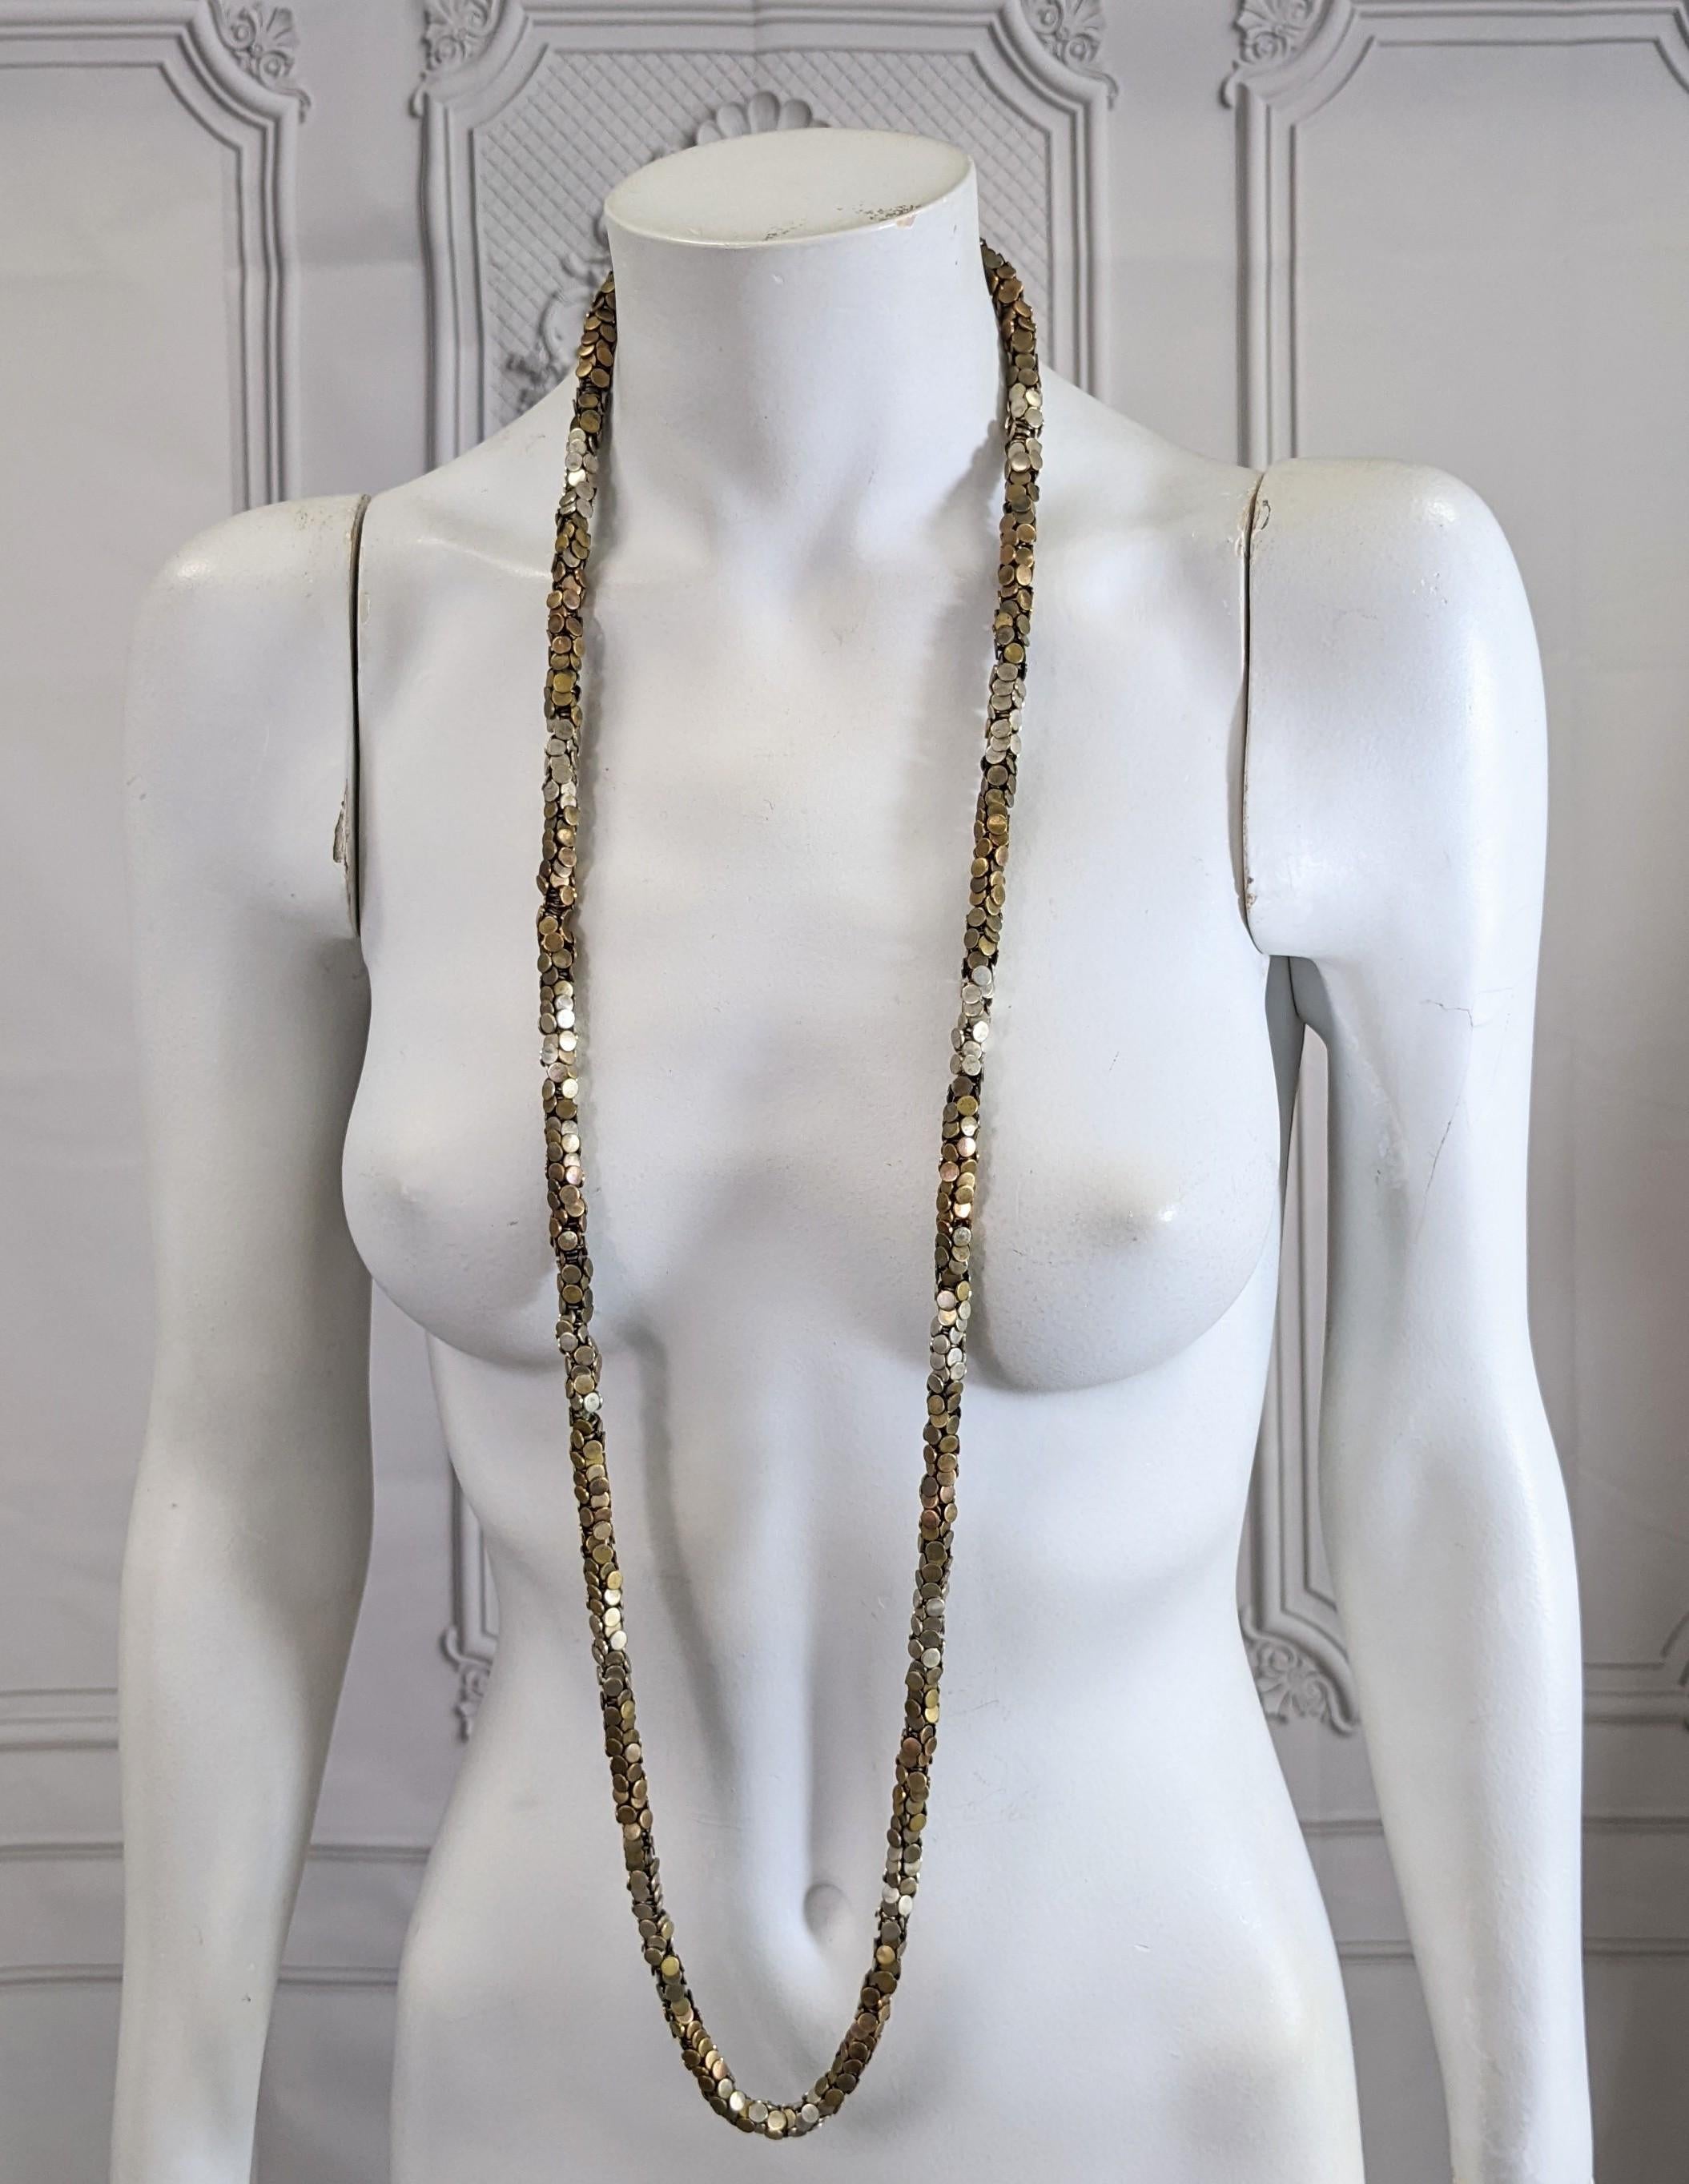 Artisanal Tricolor Nailhead Chain, Artwear Gallery, NY For Sale 2